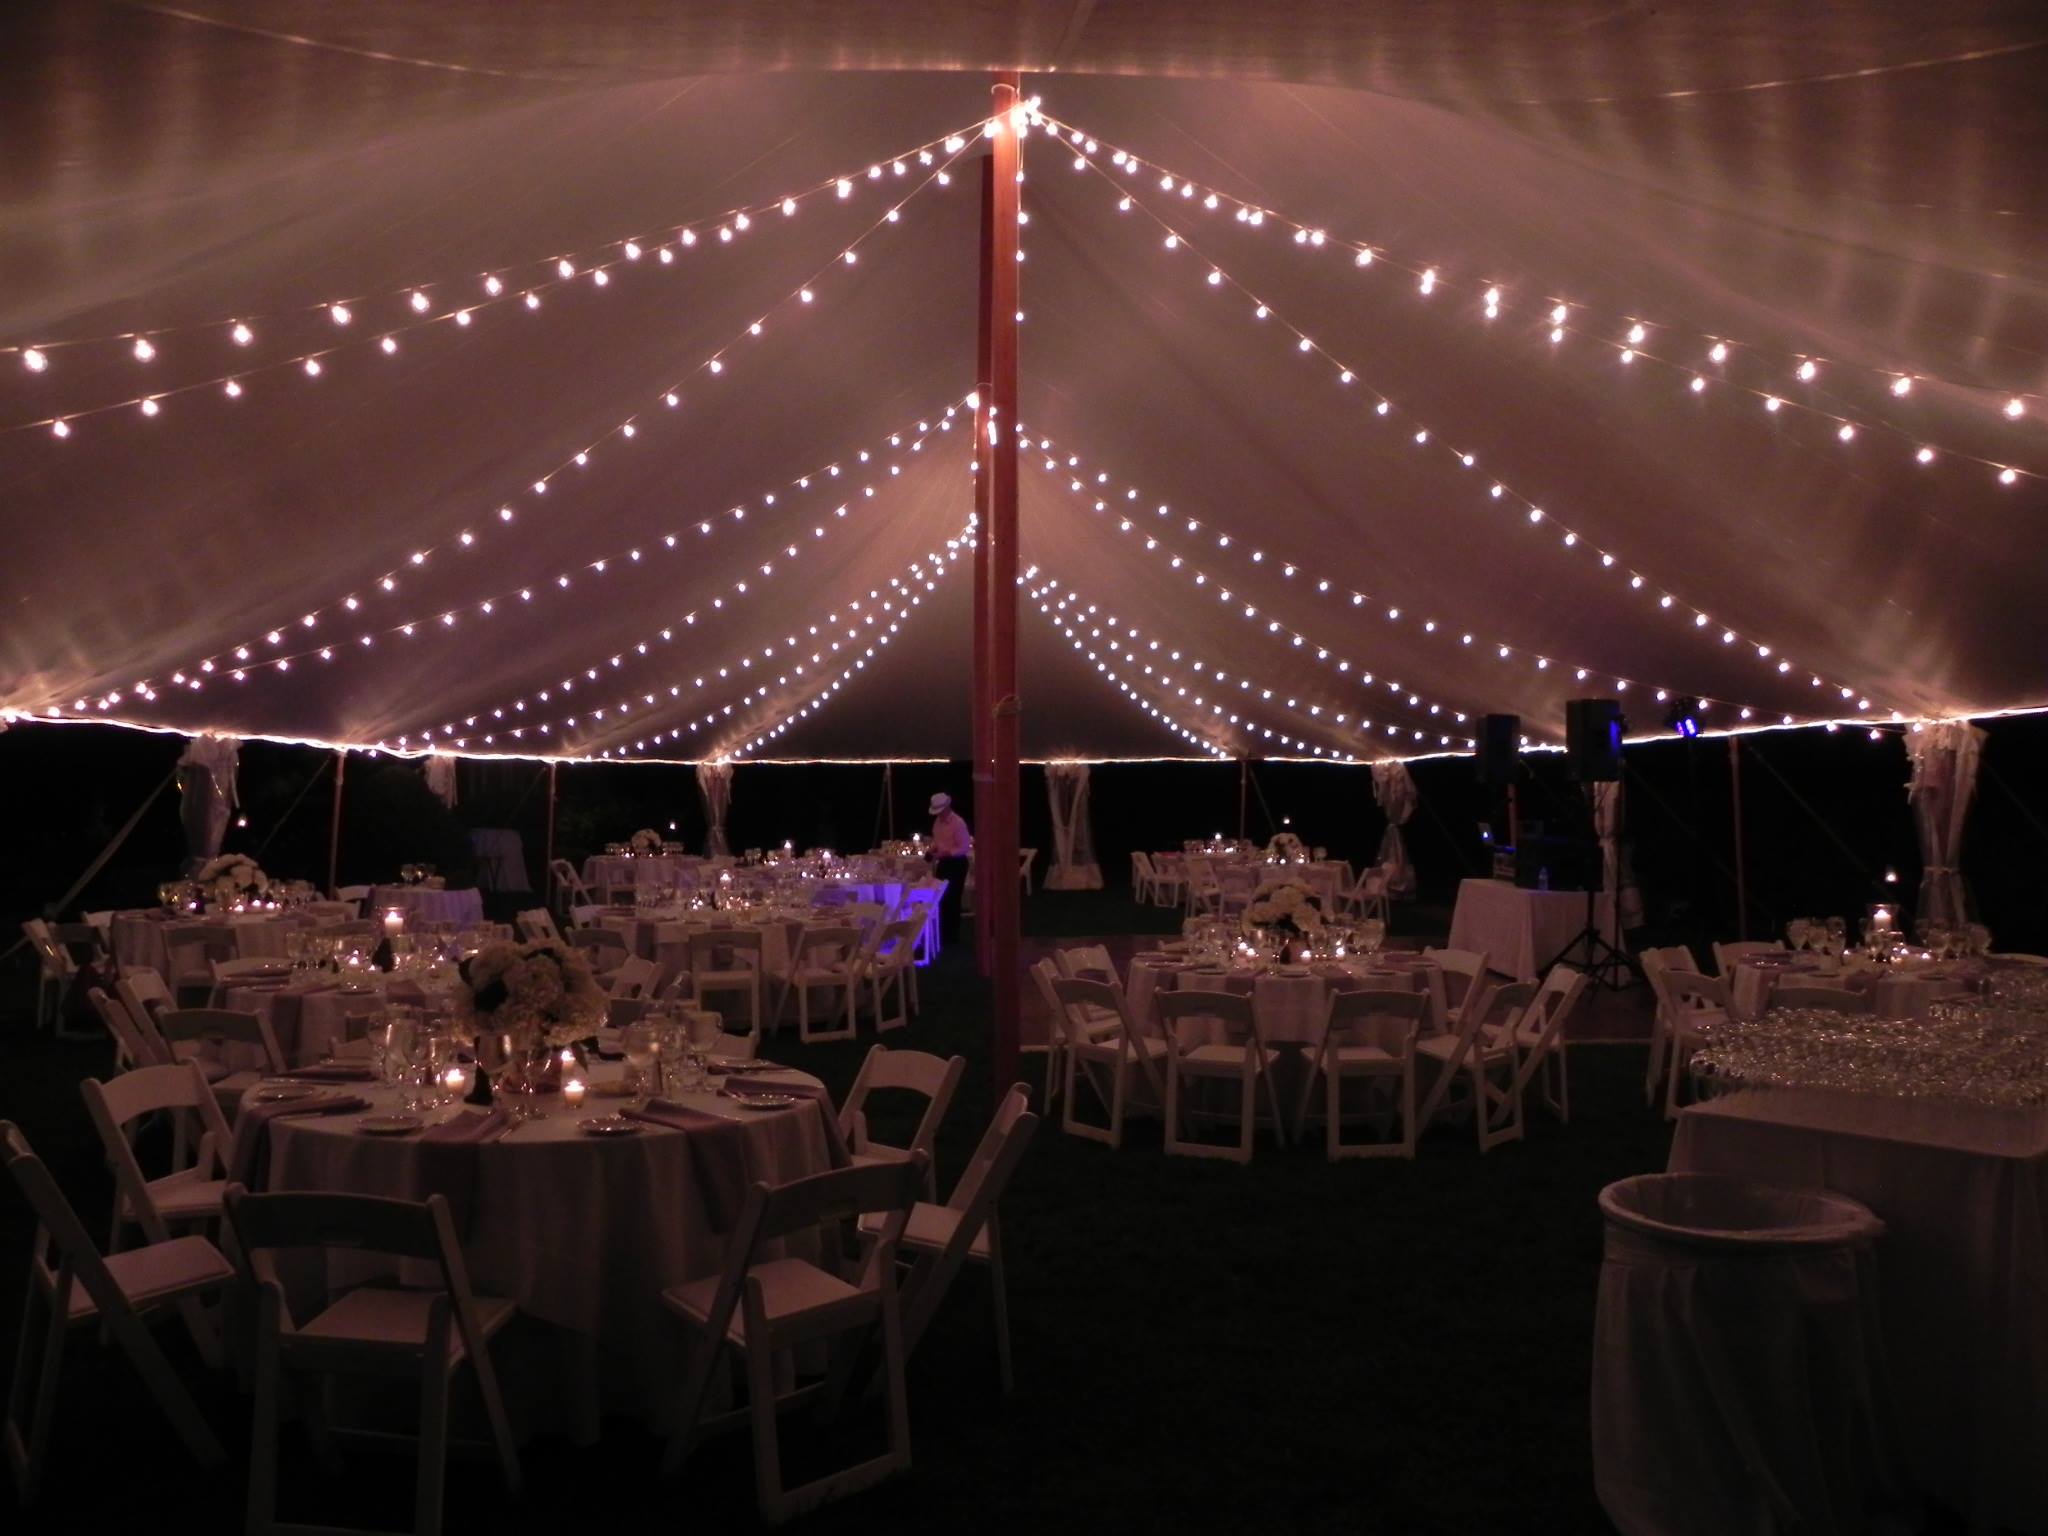 Bistro Lighting in A Tidewater Sailcloth Tent at Night